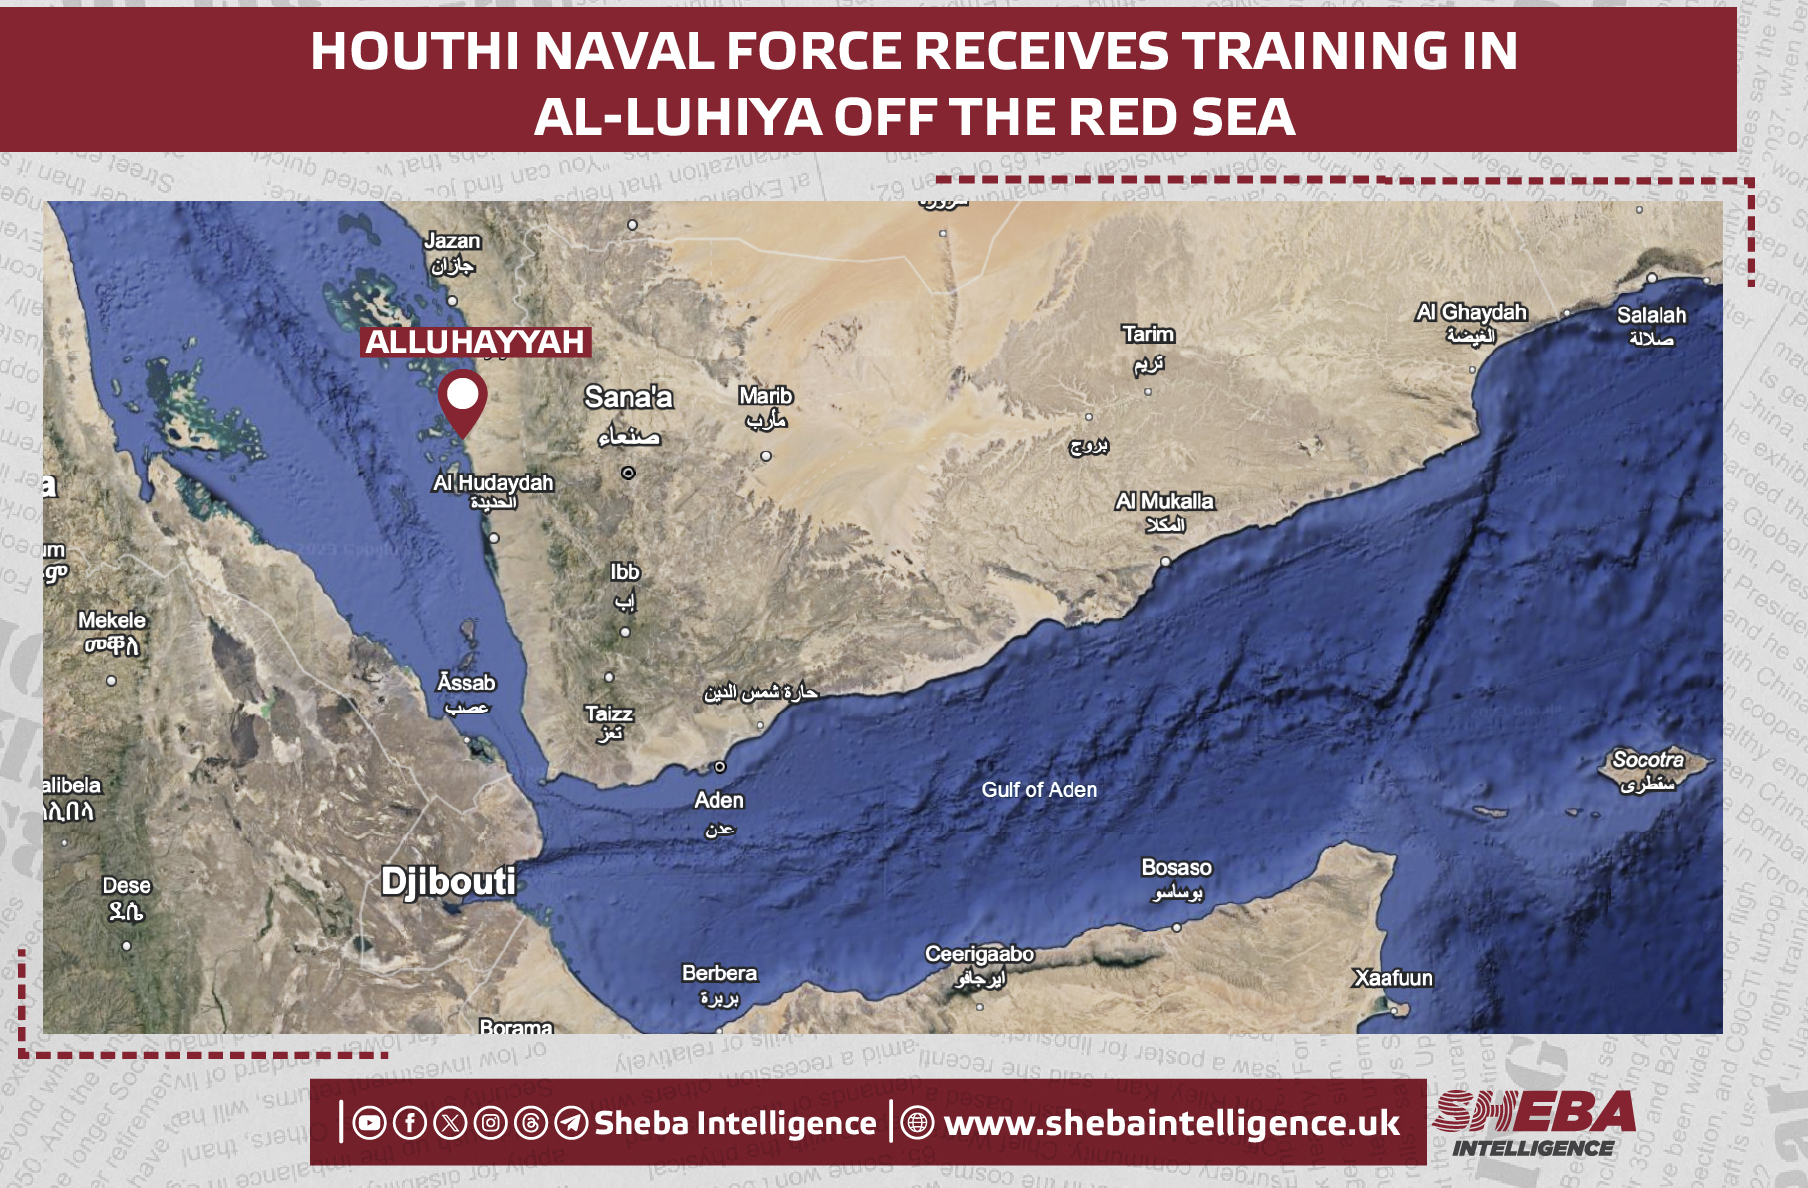 Houthi Naval Force Receives Training in Al-Luhiya off the Red Sea